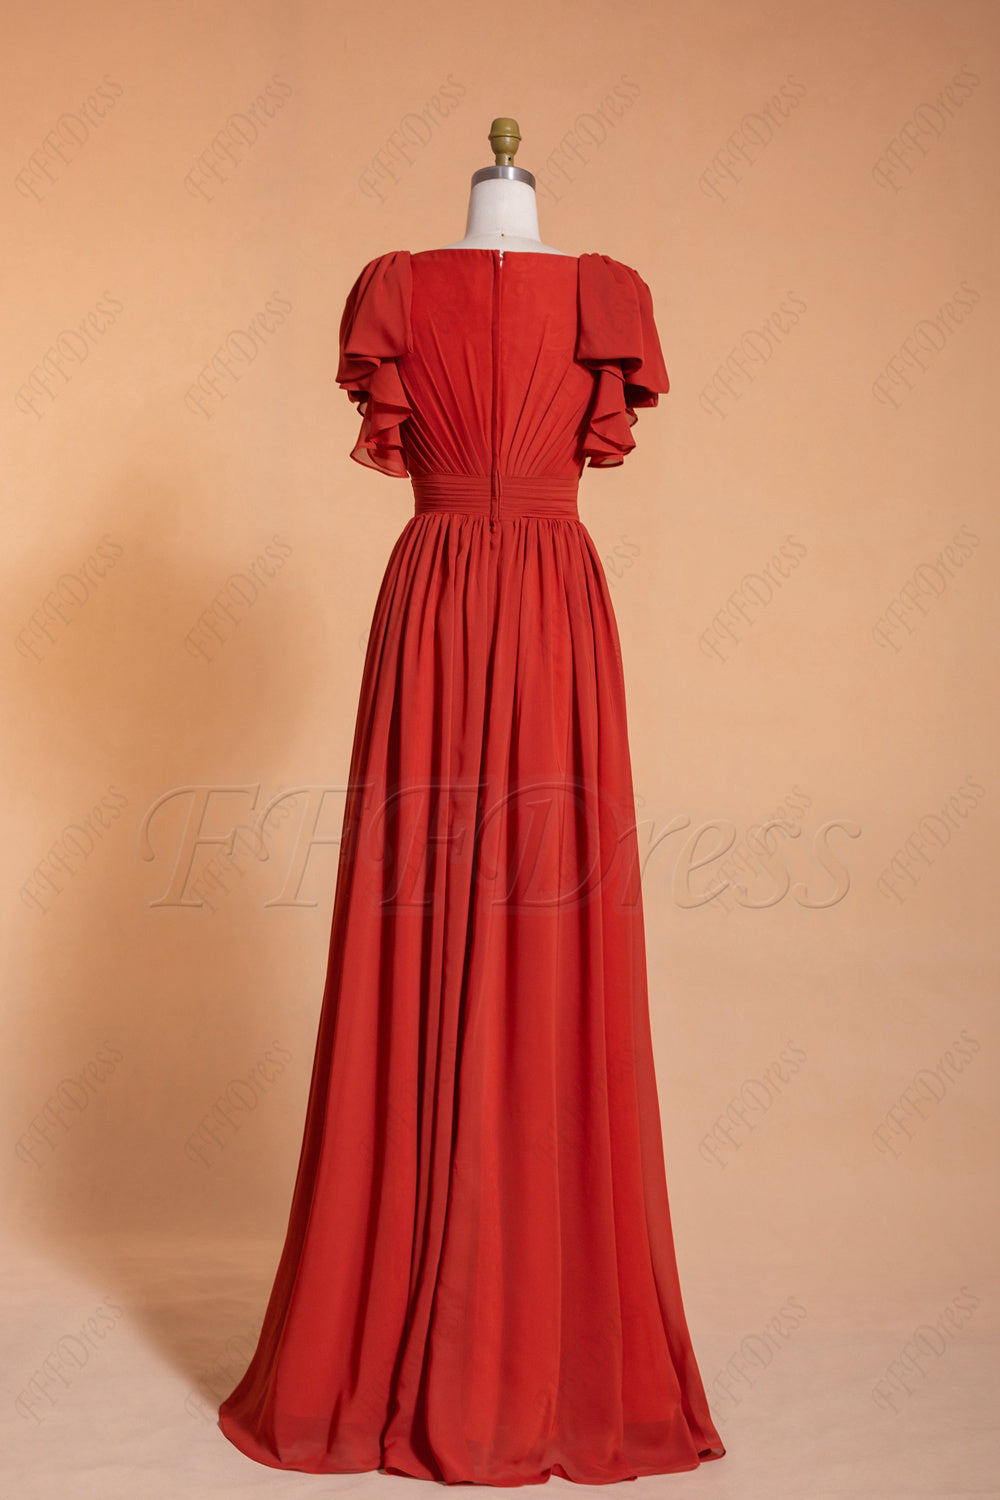 Rusted red modest long bridesmaid dresses